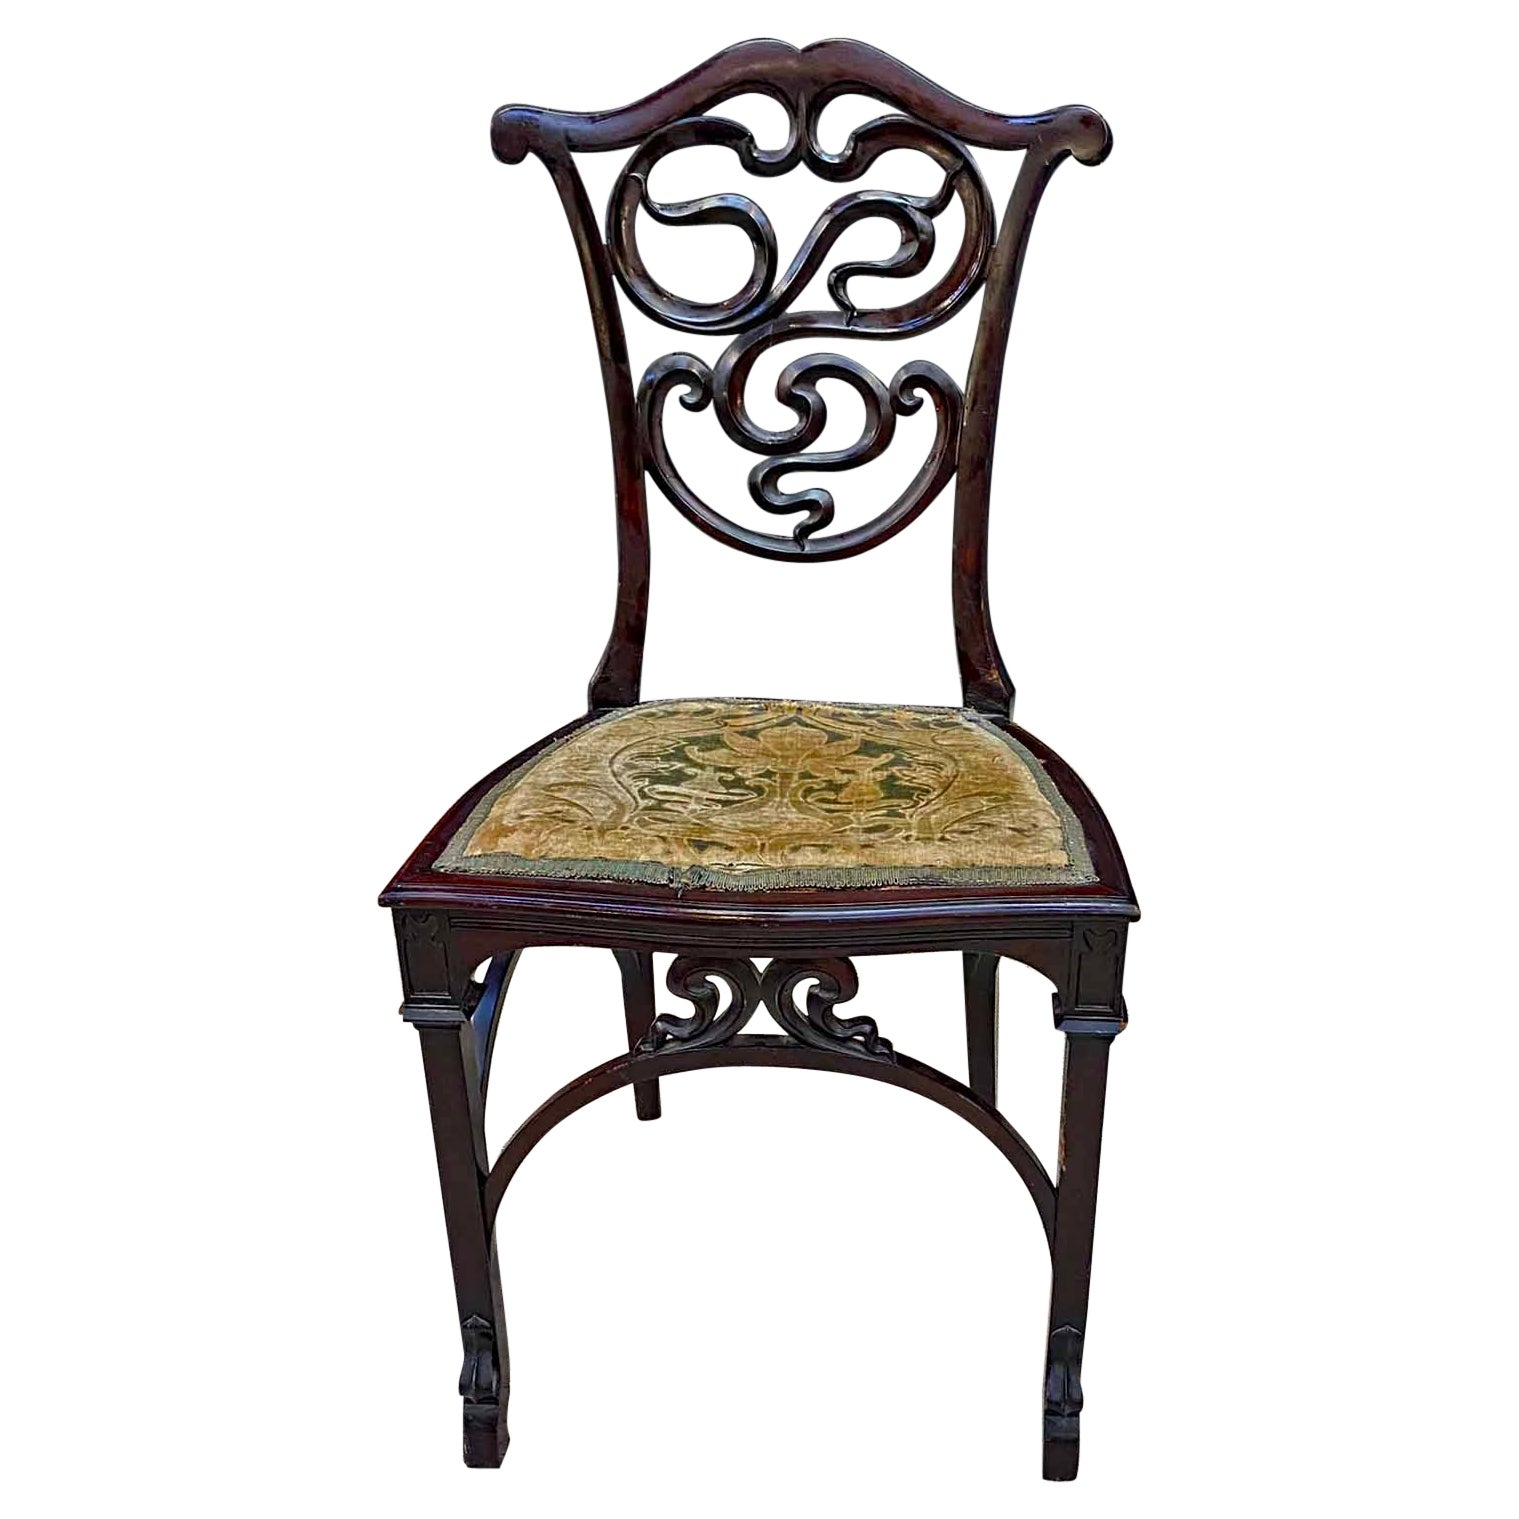 Art Nouveau period chair with Chinese pattern circa 1880, 